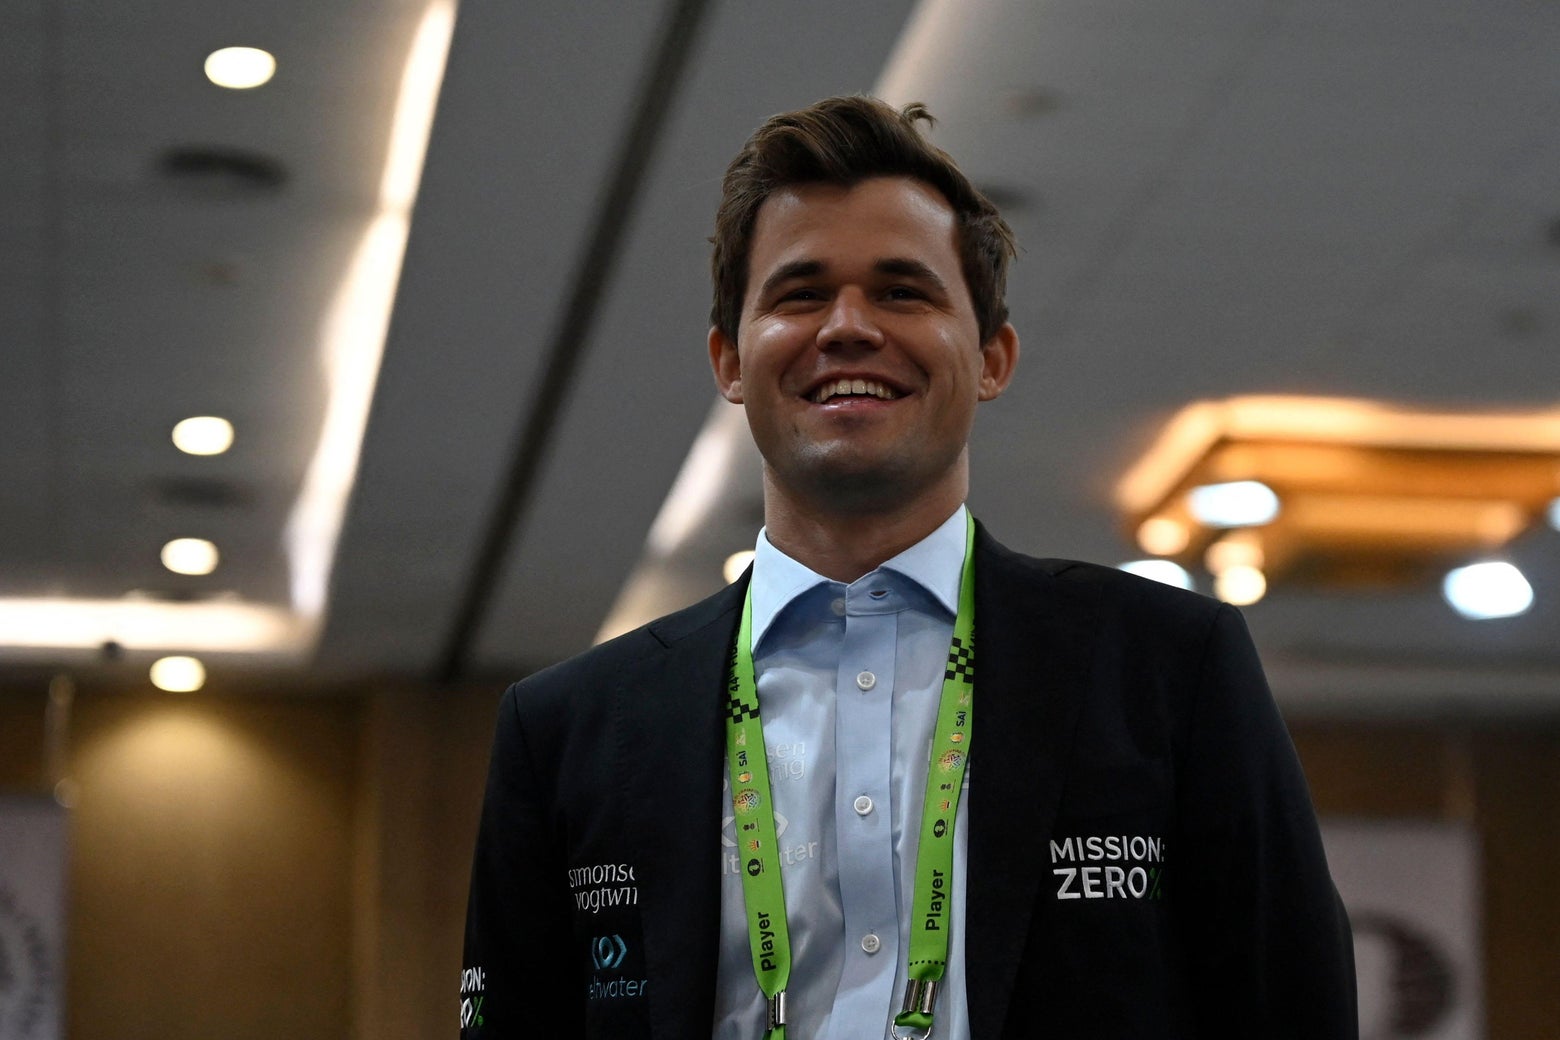 Carlsen Shows His Class in Brazil 